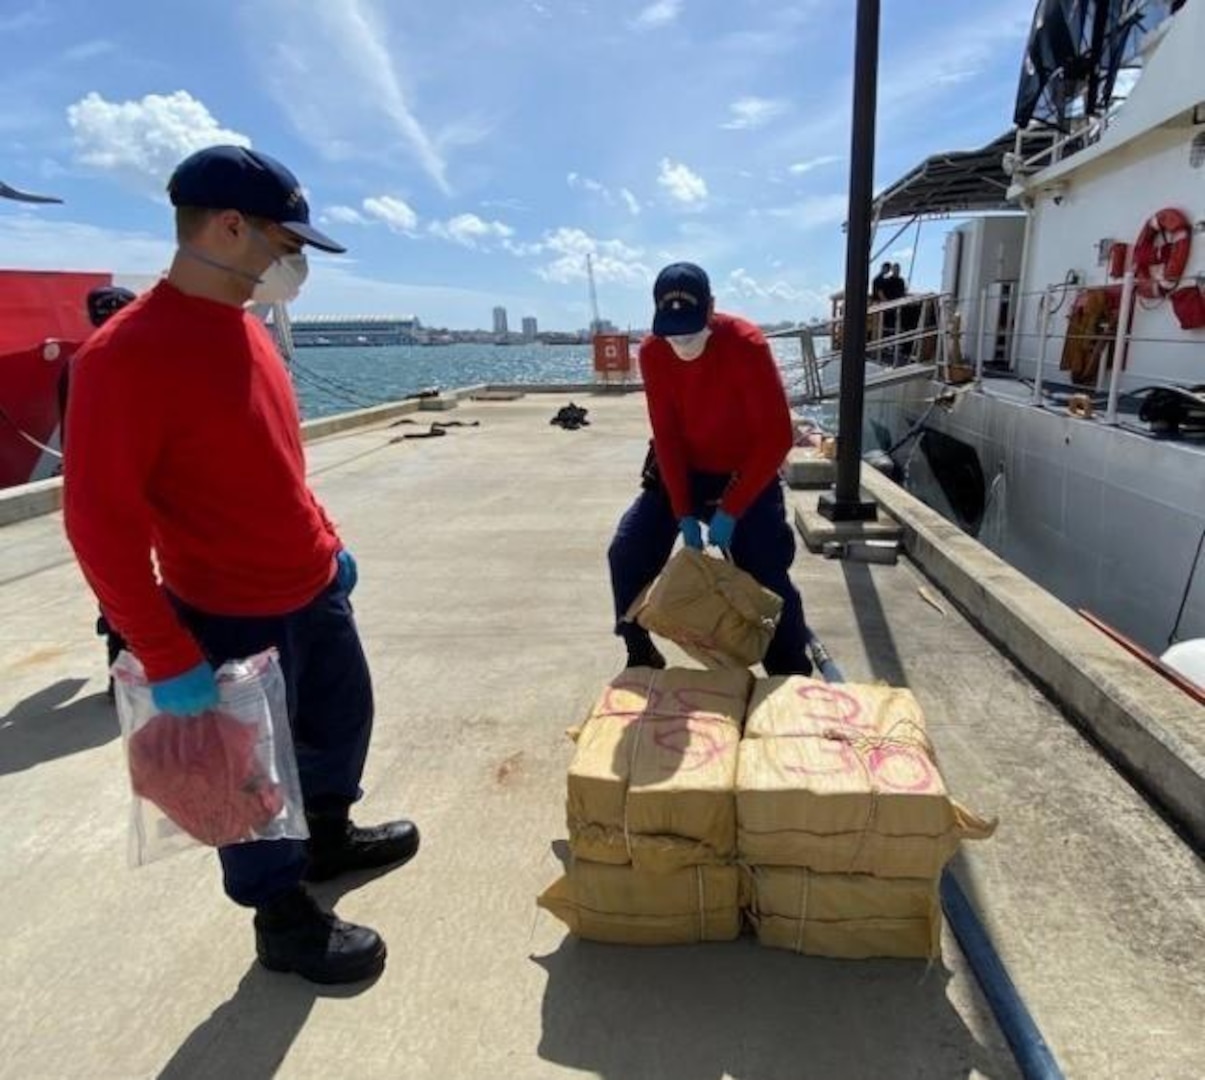 Coast Guard Cutter Heriberto Hernandez crewmembers offload six bales of cocaine, weighing approximately 463 pounds, at Coast Guard Base San Juan April 18, 2022, following the interdiction of a go-fast smuggling vessel near Puerto Rico April 11, 2022. The interdiction is the result of multi-agency efforts involving the Caribbean Border Interagency Group and the Caribbean Corridor Strike Force. (U.S. Coast Guard photo)